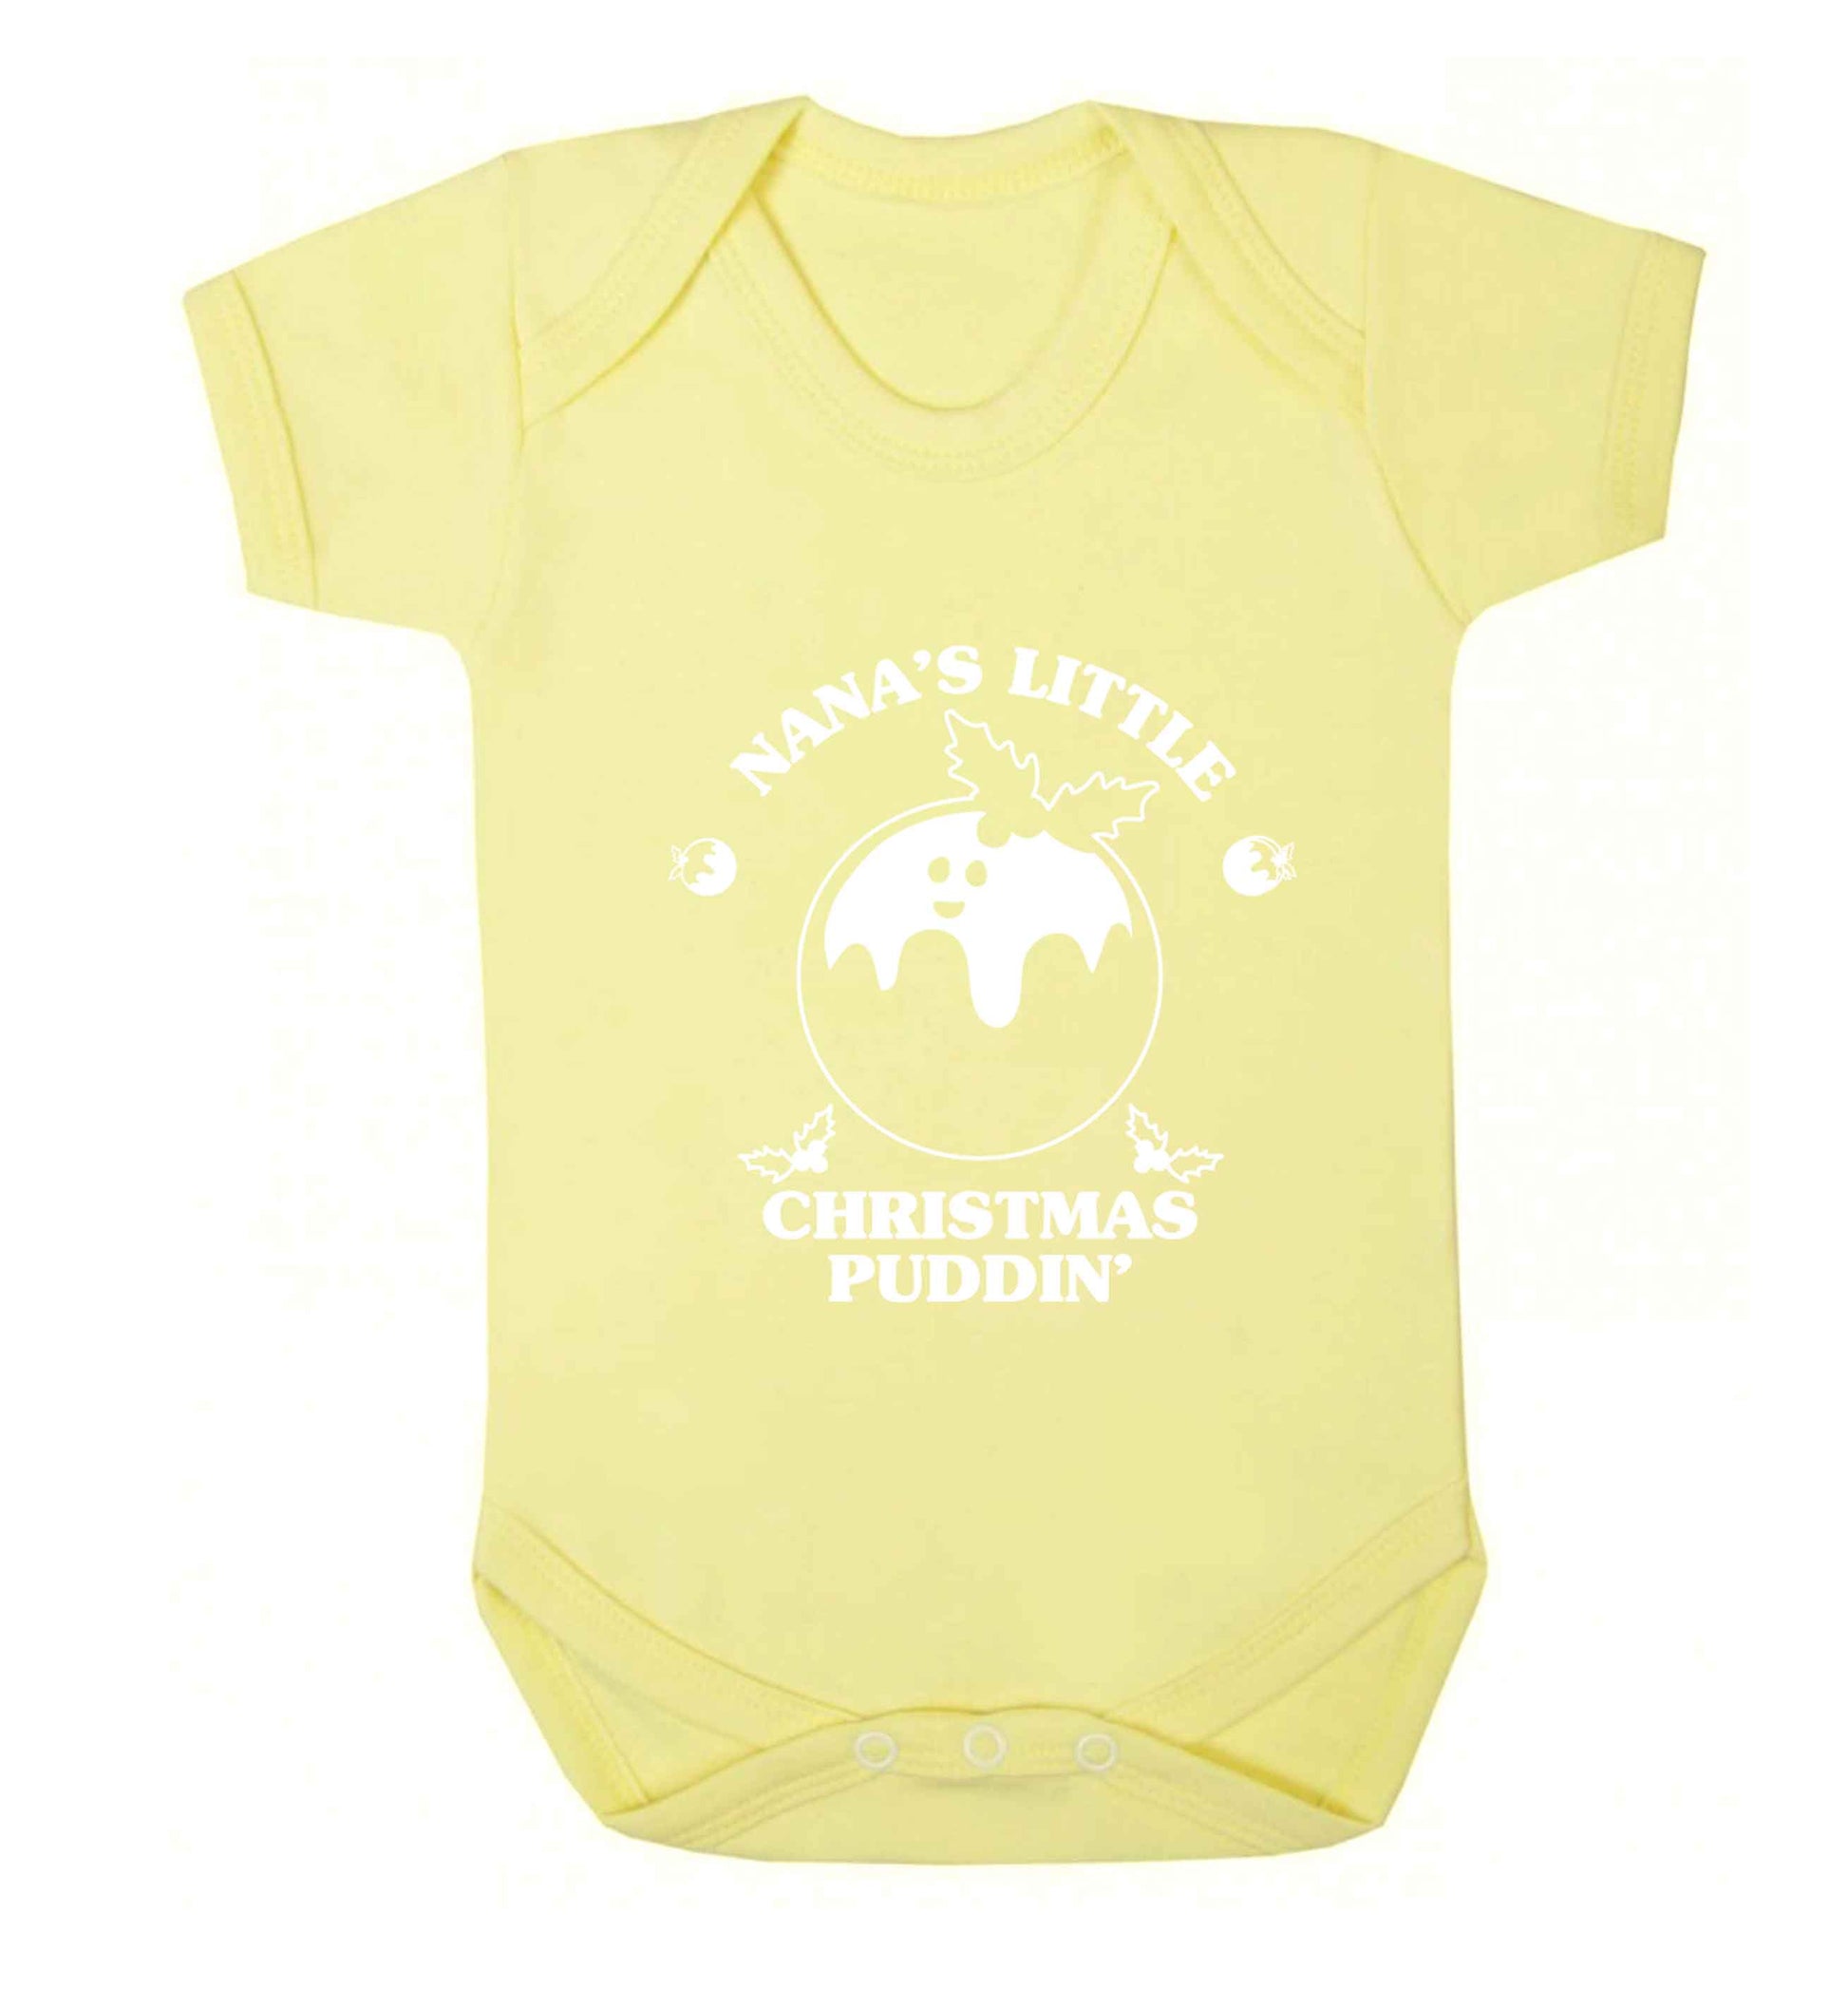 Nana's little Christmas puddin' Baby Vest pale yellow 18-24 months